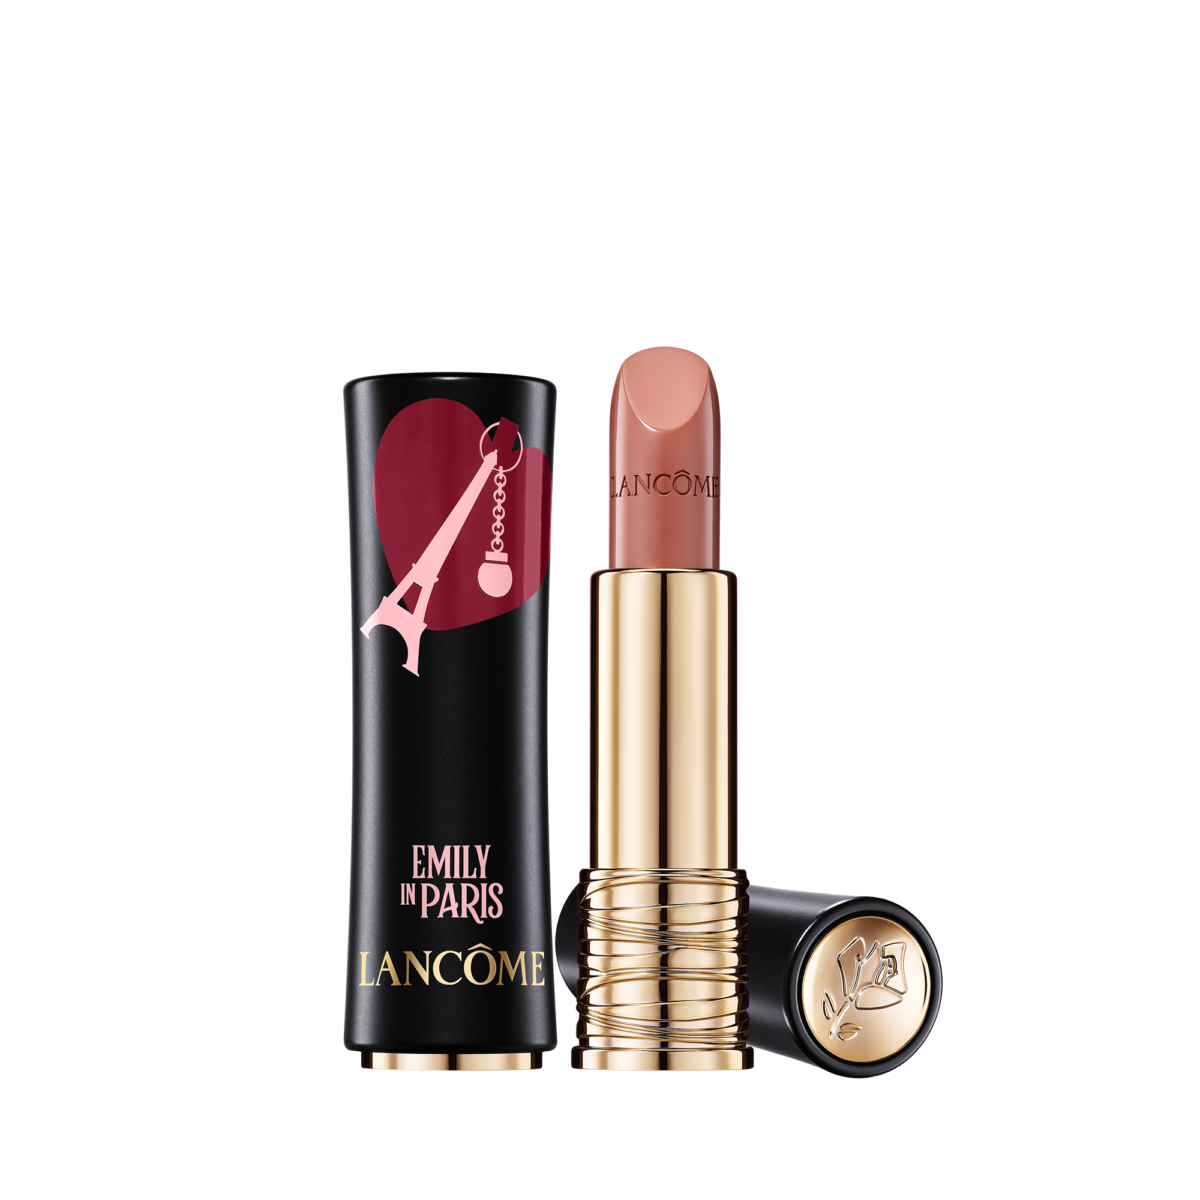 Lancome-Lipstick-L_absolu-Rouge-Cream-274-French-Tea-Emily-In-Paris-3,4g-000-3614273673525-OpenClosed